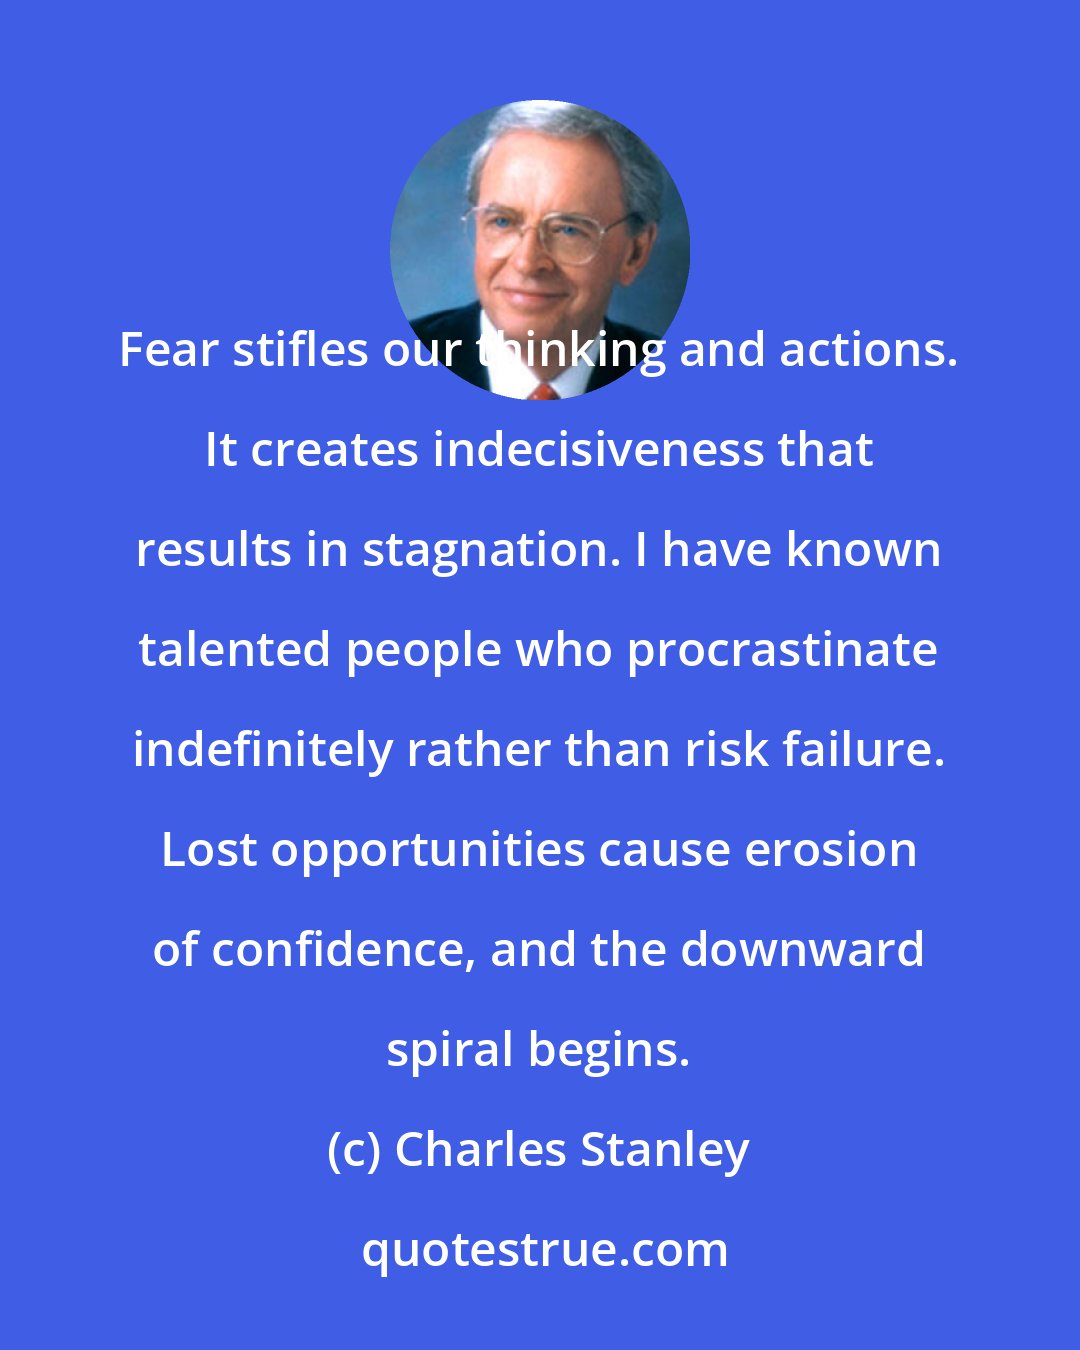 Charles Stanley: Fear stifles our thinking and actions. It creates indecisiveness that results in stagnation. I have known talented people who procrastinate indefinitely rather than risk failure. Lost opportunities cause erosion of confidence, and the downward spiral begins.